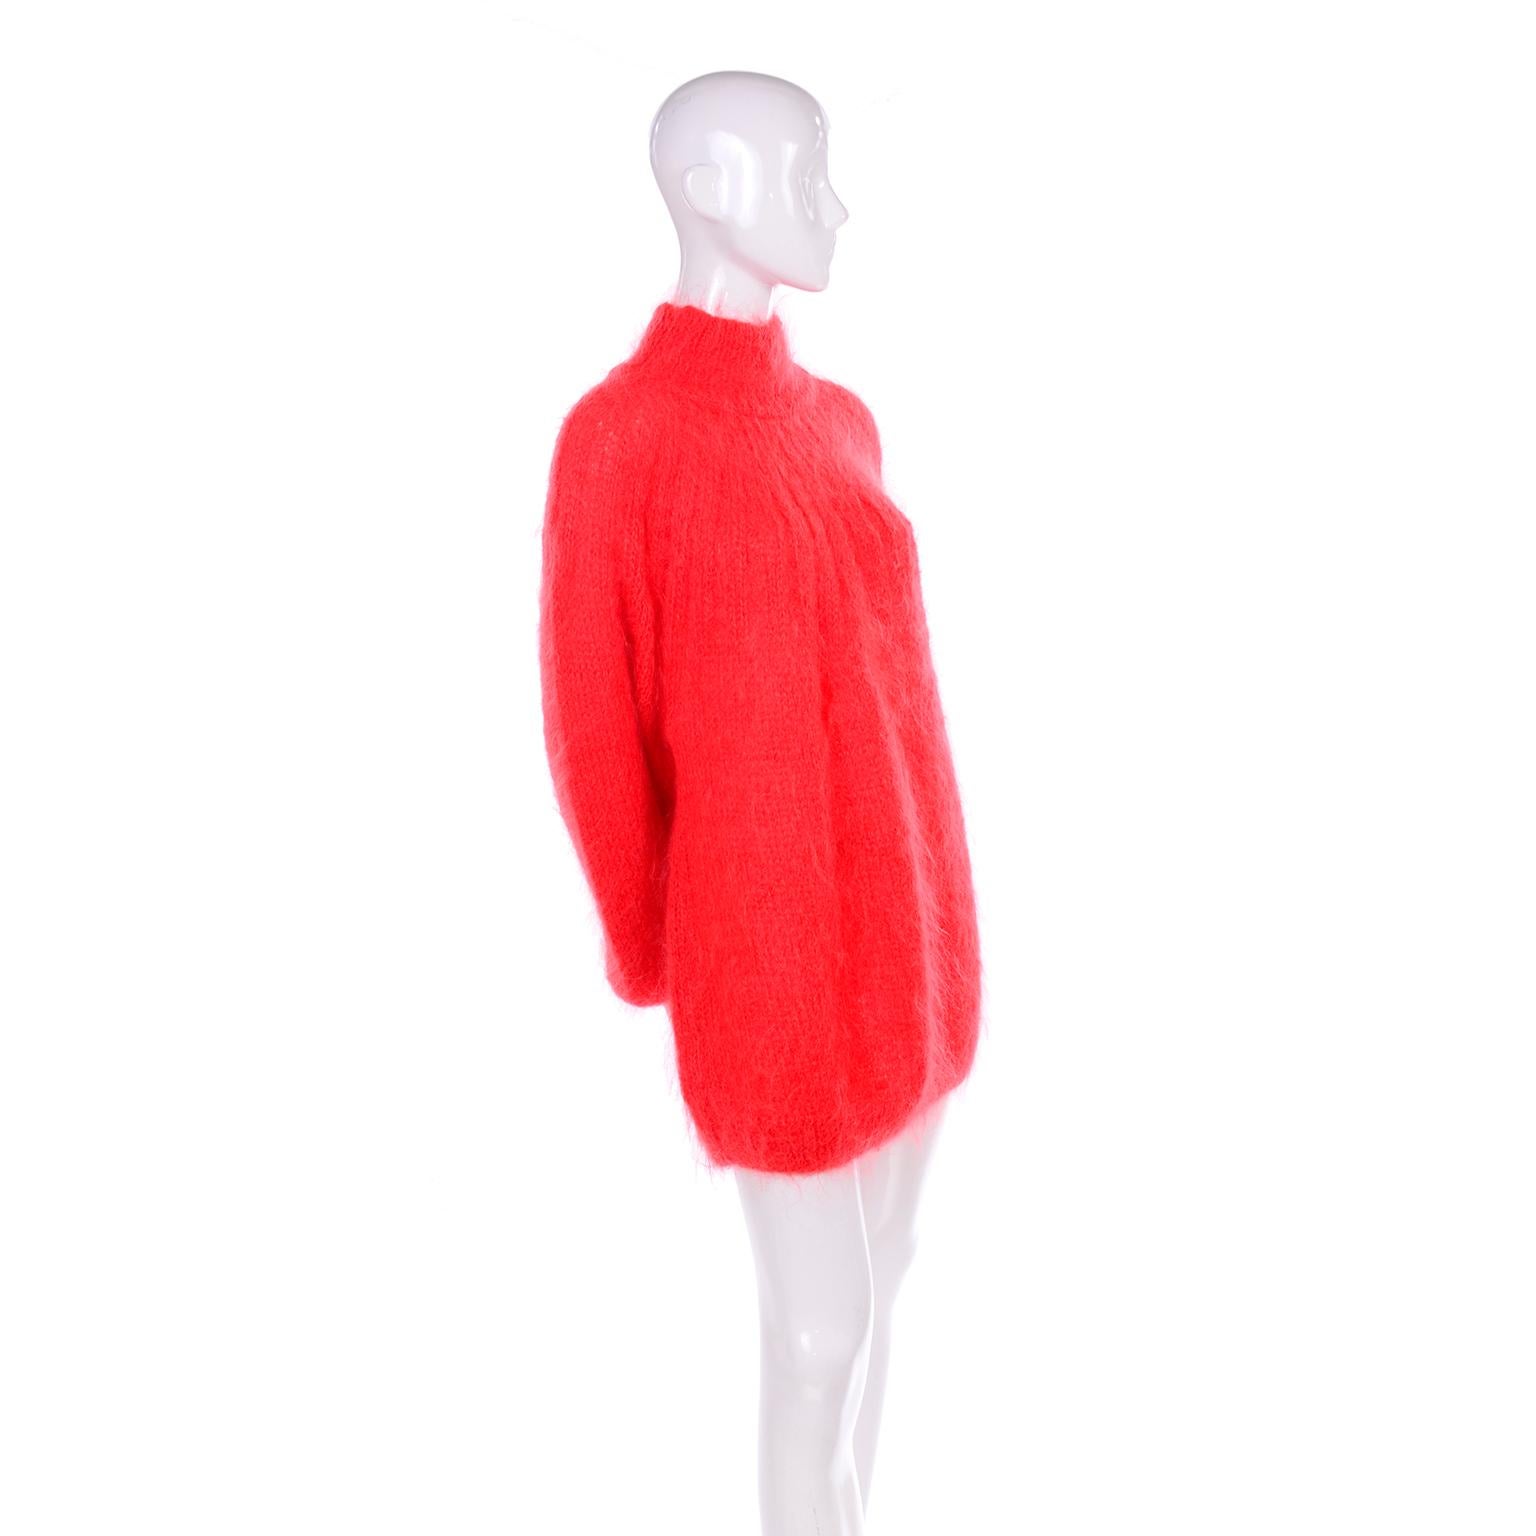 This is a gorgeous, extremely soft mohair and wool blend sweater, with an oversized fit that makes this work as either a sweater or we love it when it's worn as a sweater dress! This 1980's deep coral sweater has ribbing down the front and a high